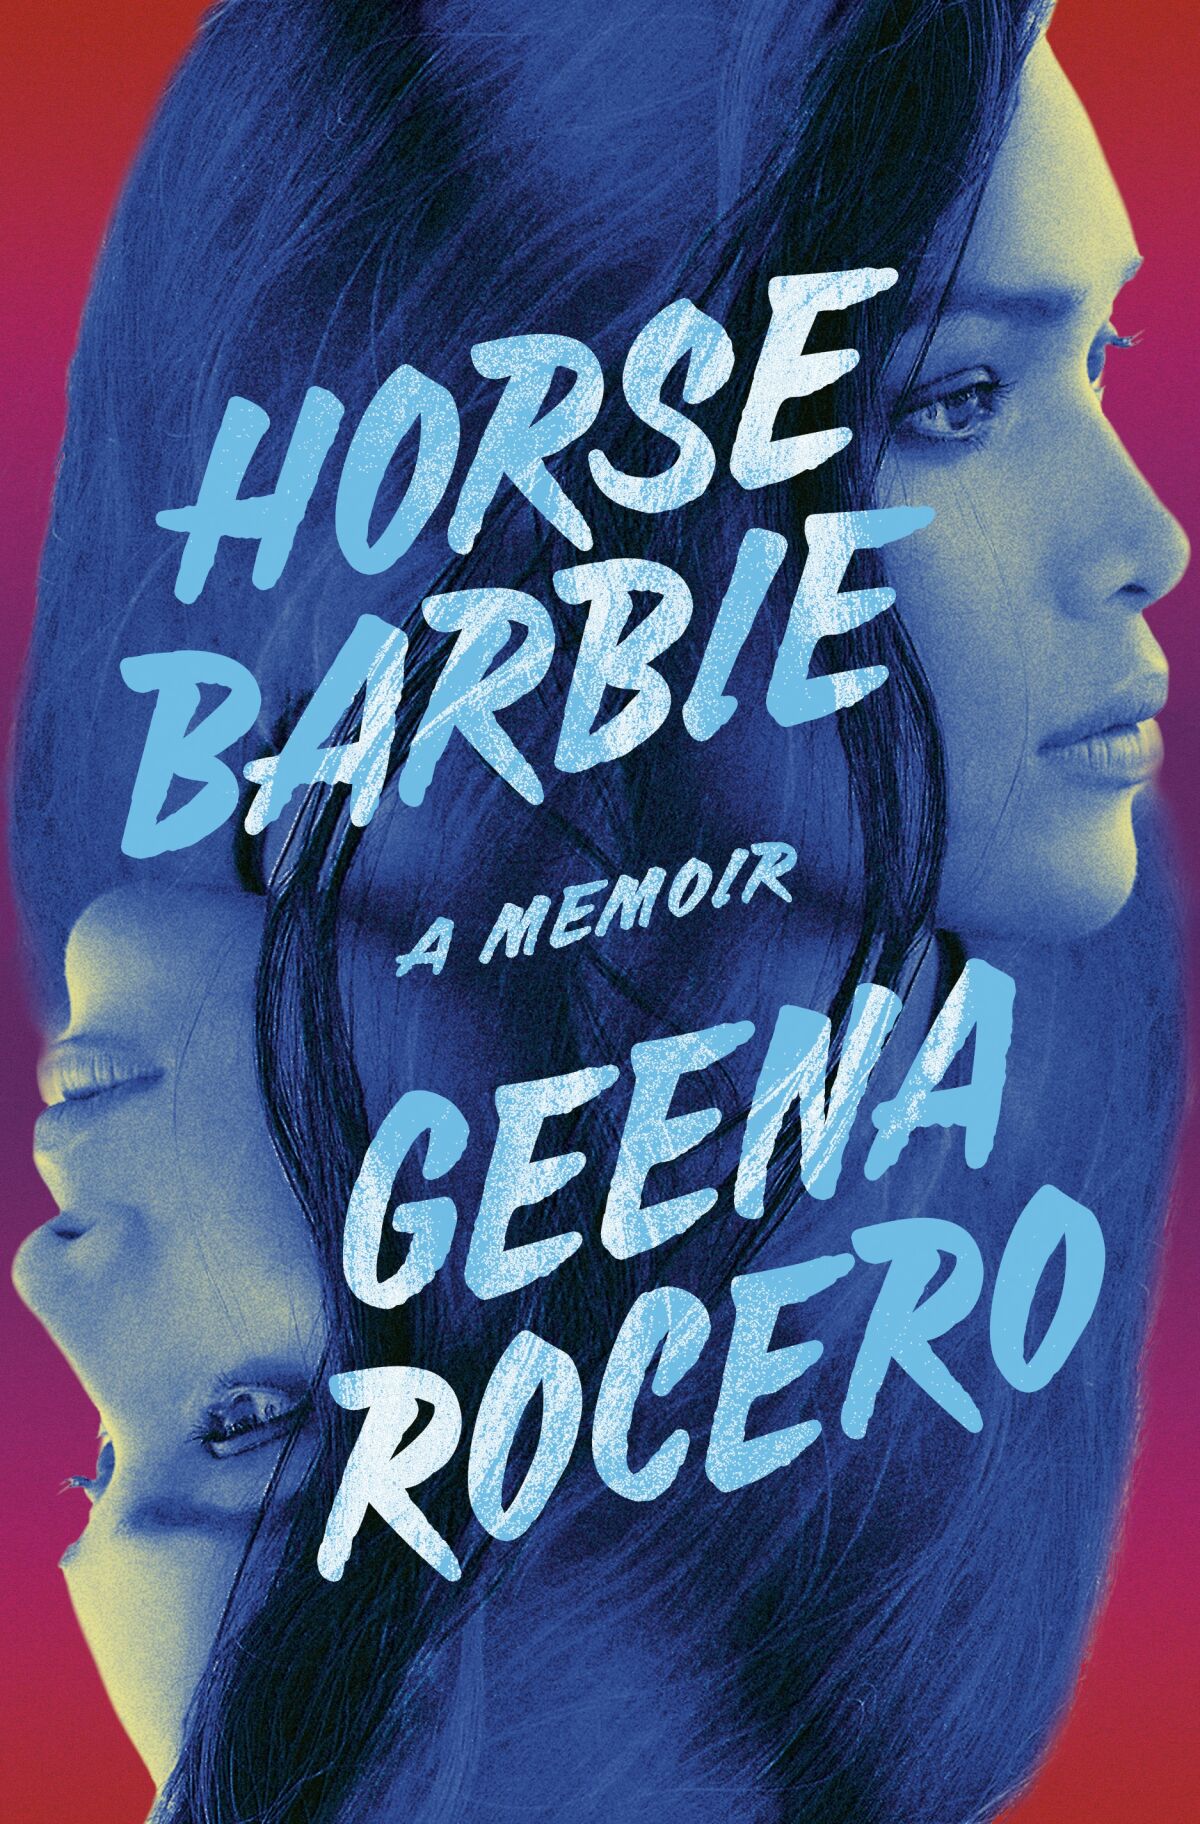 The cover of "Horse Barbie" by Geena Rocero shows a woman with dark hair. 